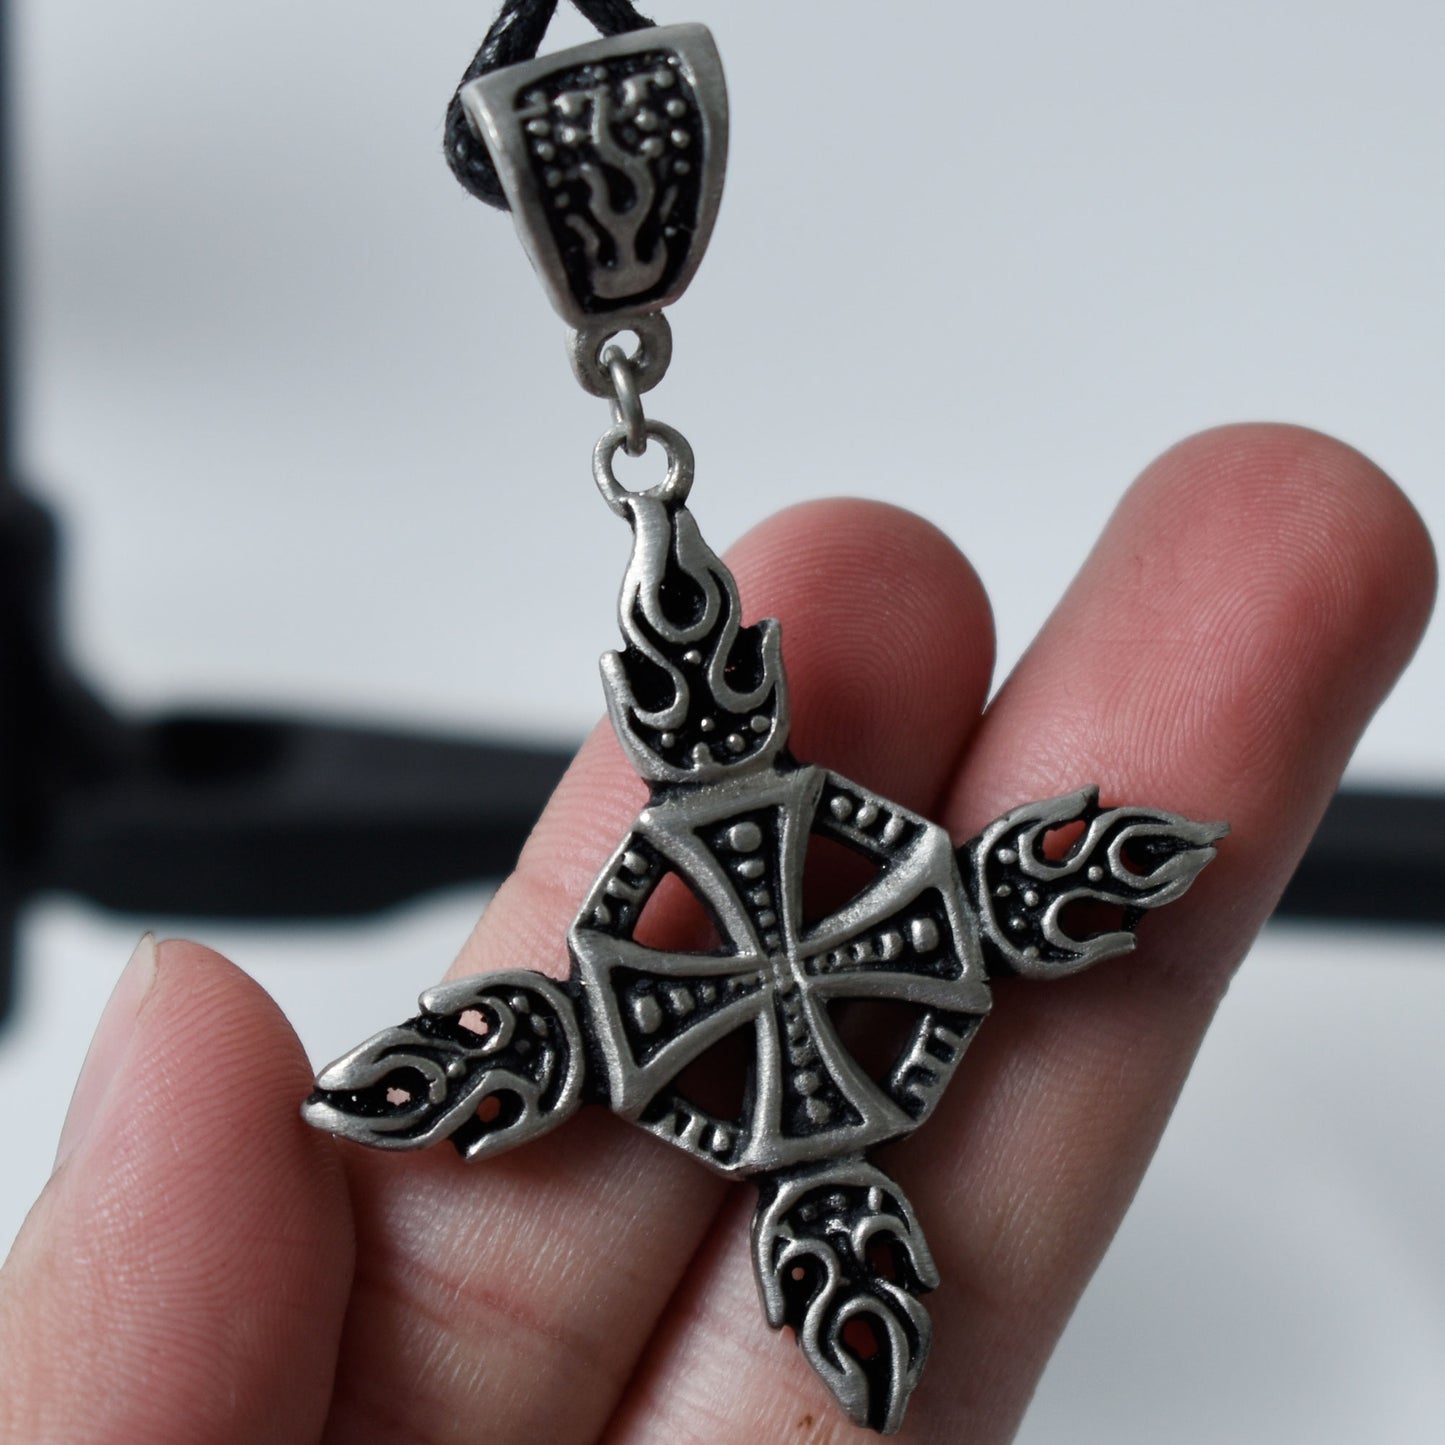 New German Iron Cross Silver Pewter Charm Necklace Pendant Jewelry